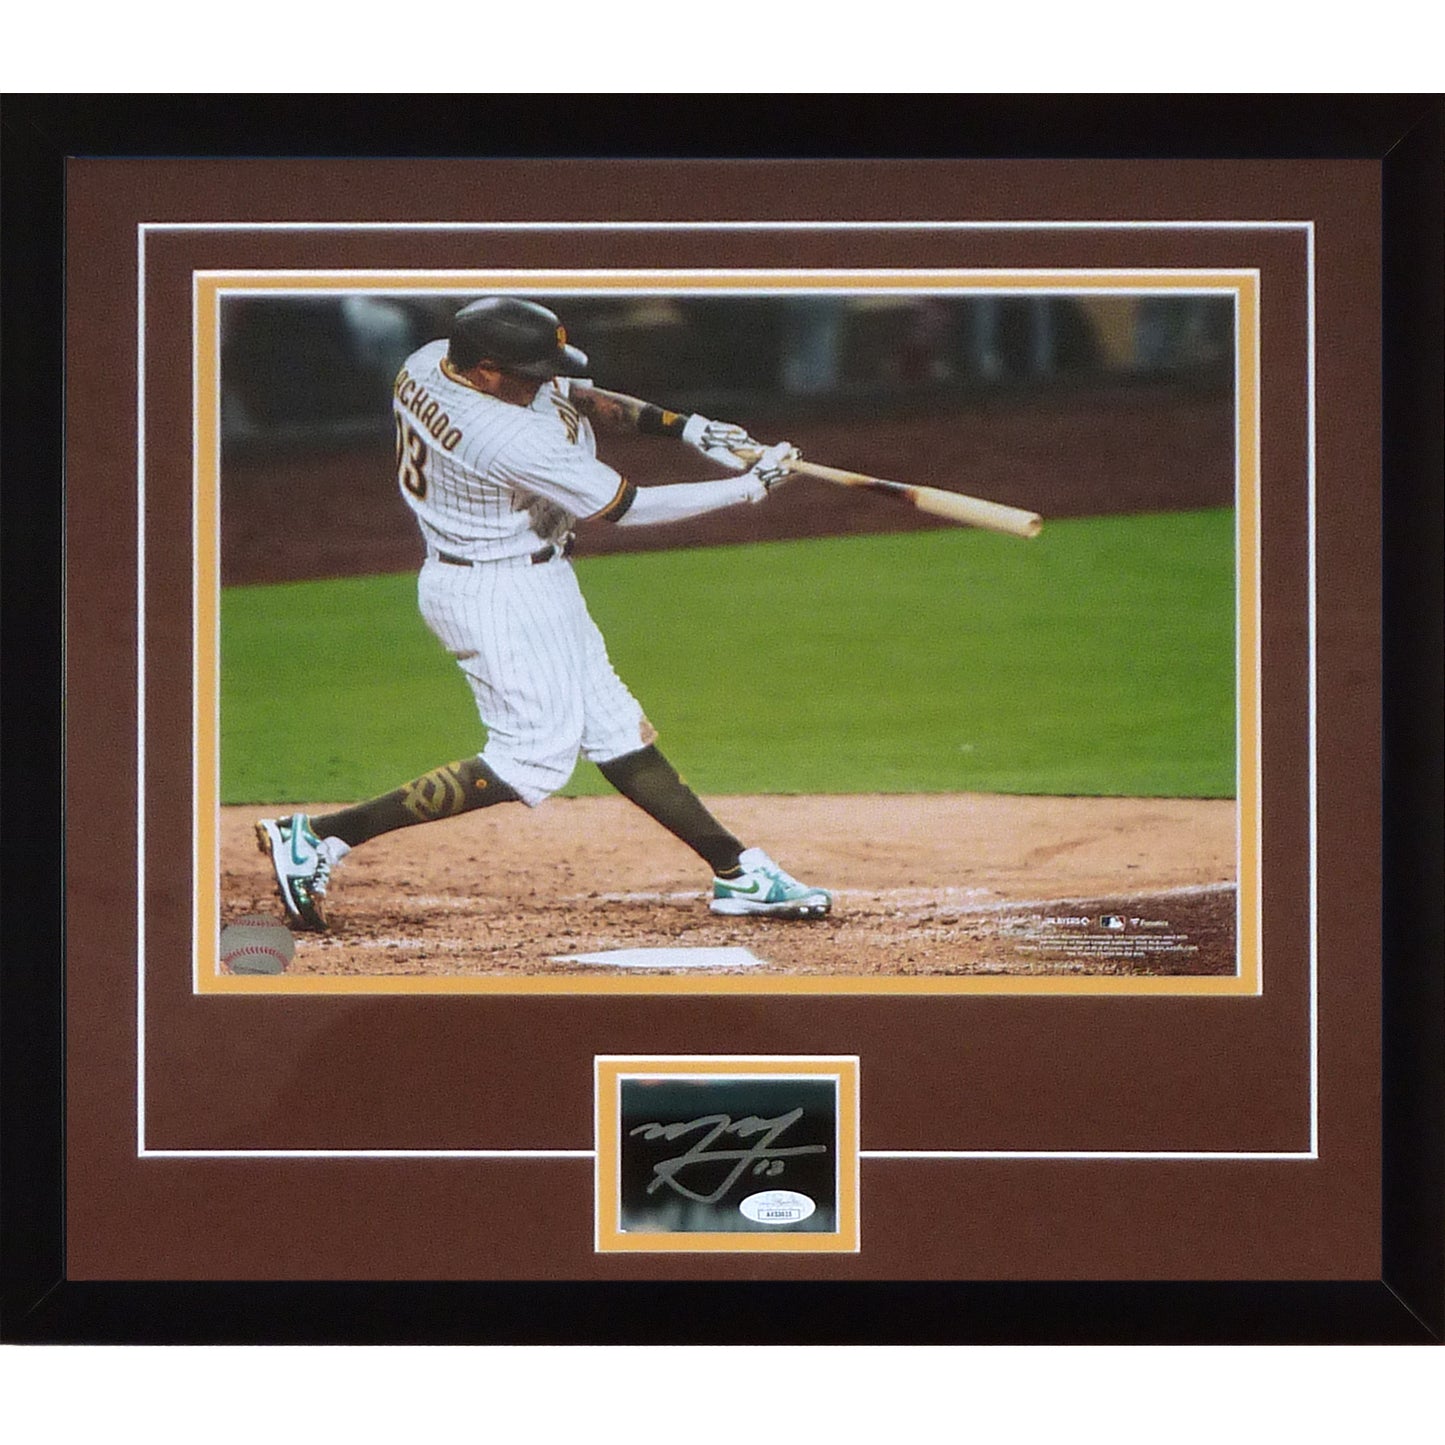 Manny Machado Autographed San Diego Padres Deluxe Framed 11x14 Photo Piece - JSA